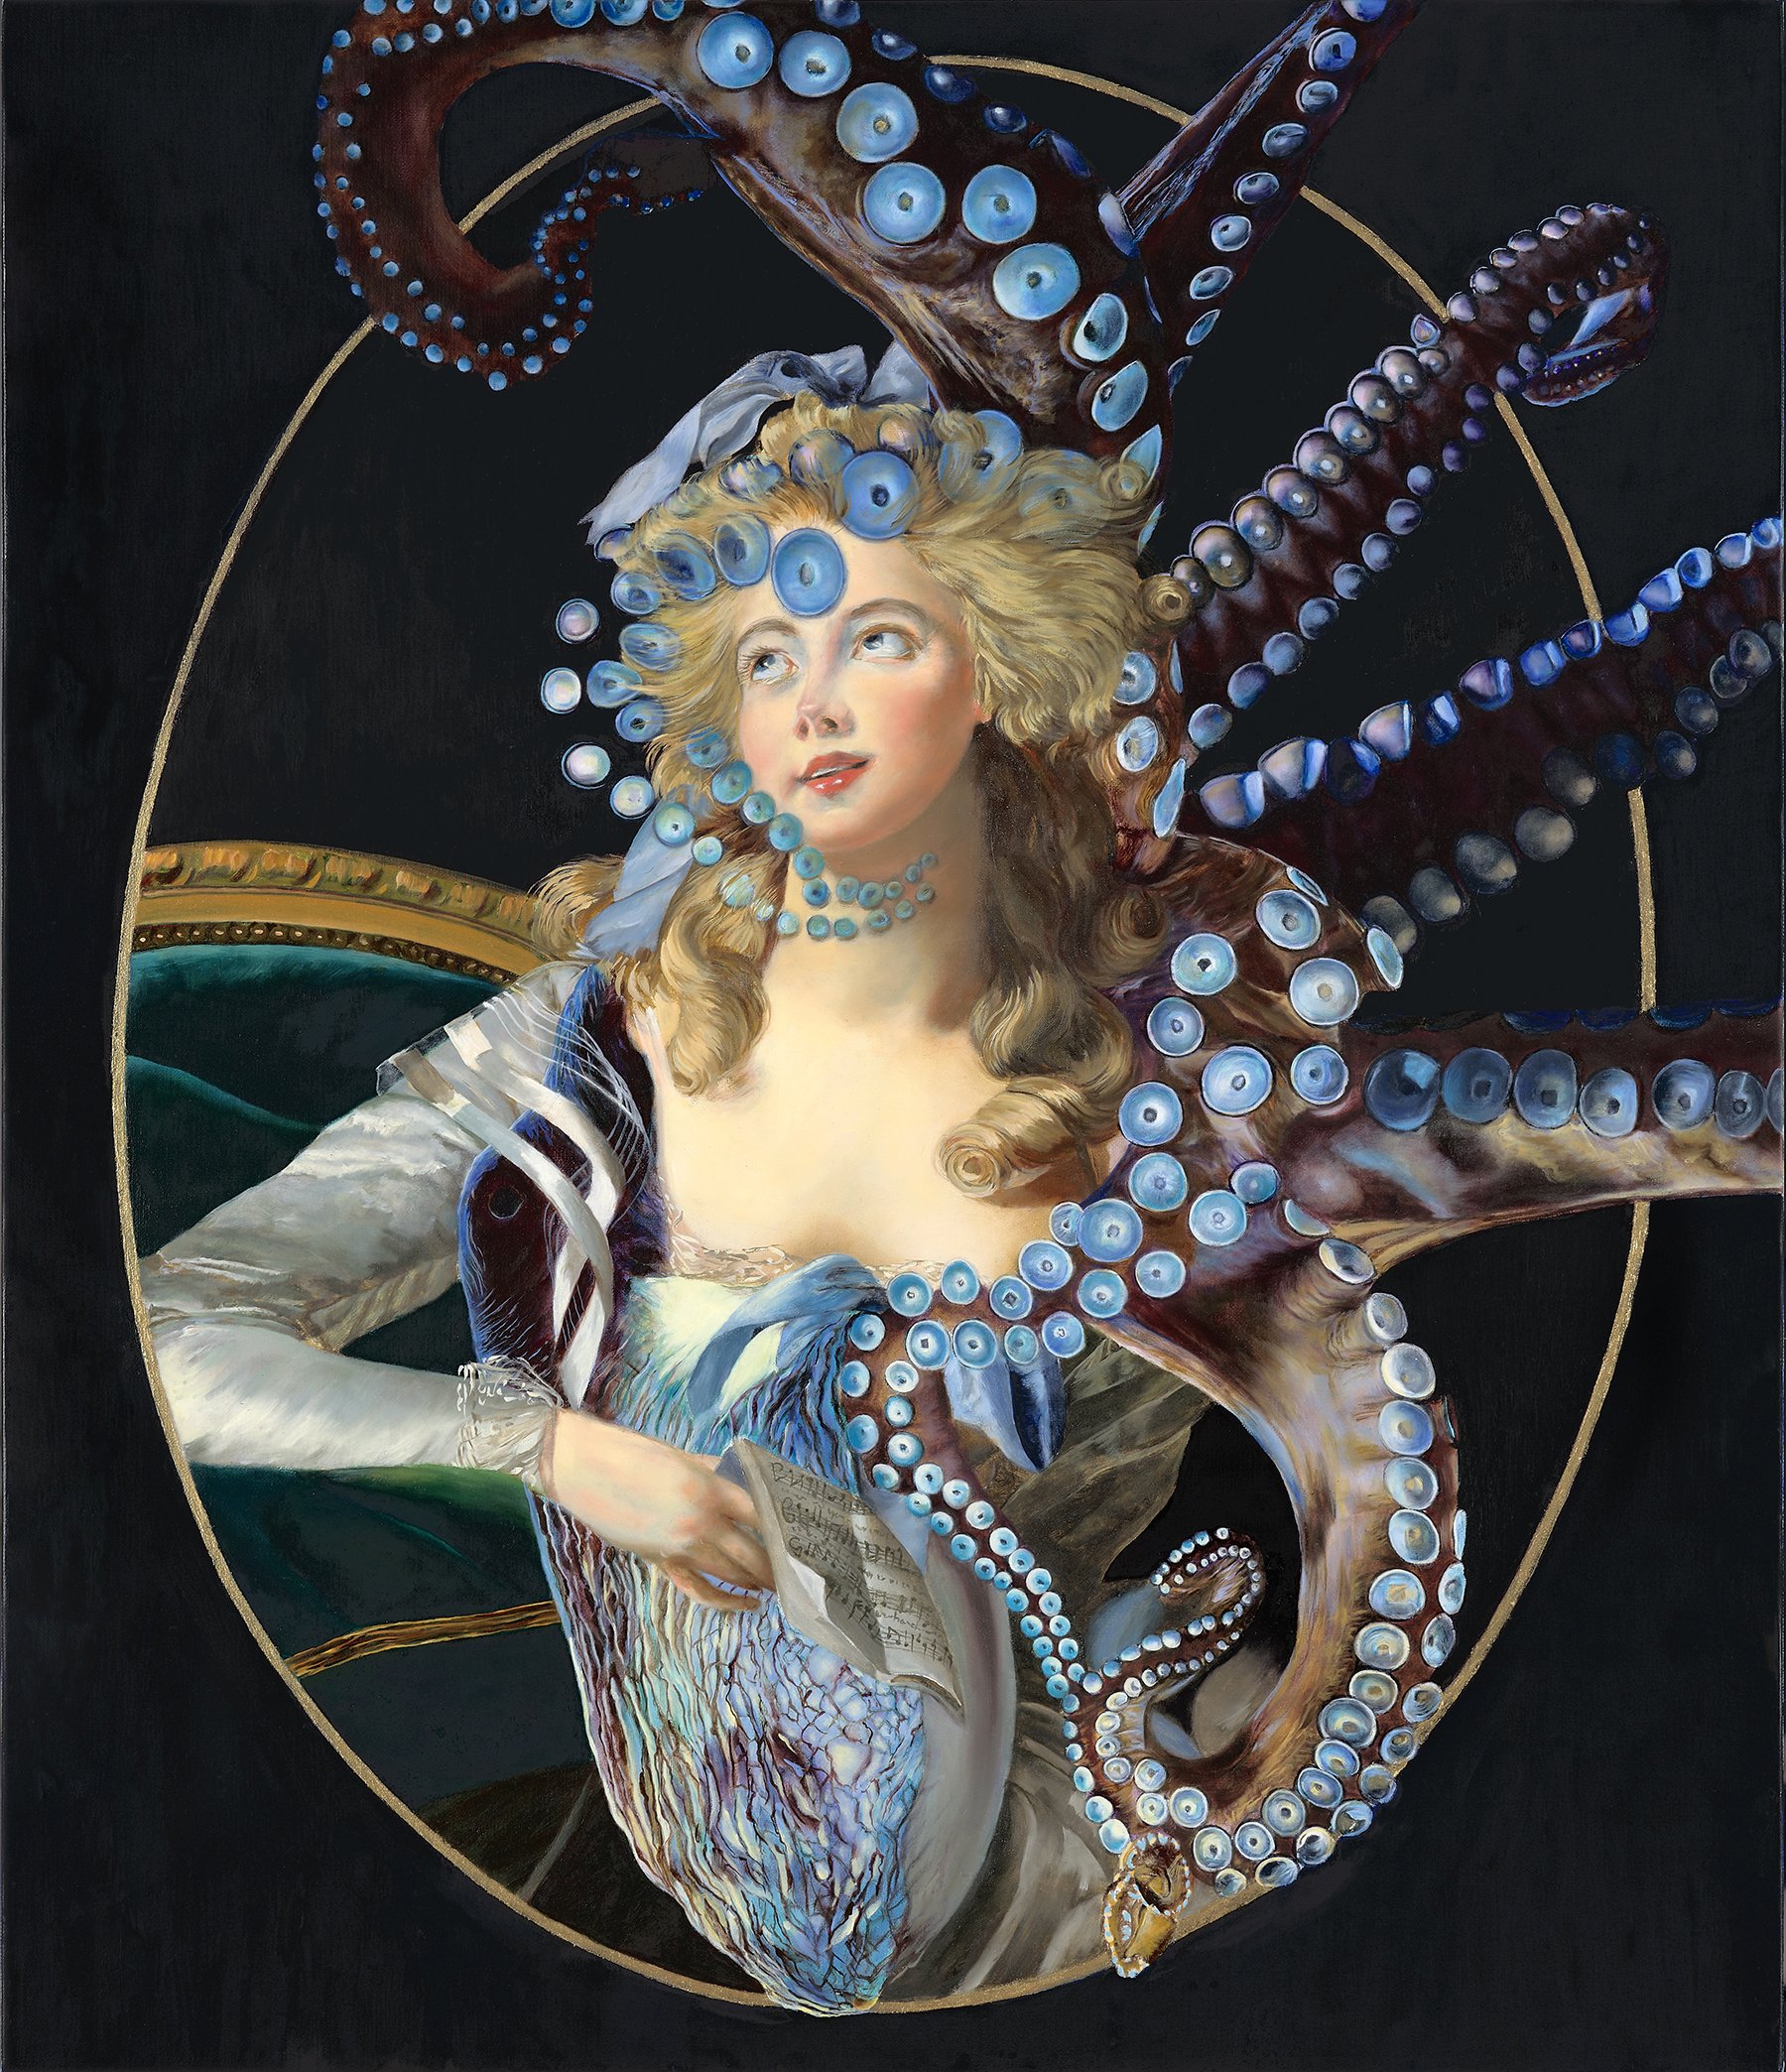    Madame Grand in Skin-Sucker Reverie with Bag Pipe Third Eye Octopus    oil on linen  23 x 27 inches  2023  &nbsp;  &nbsp;  This is my home, green and crystal blue, deep shimmering and cold. My waters are off the Argyll coast of Scotland. I’ve got 